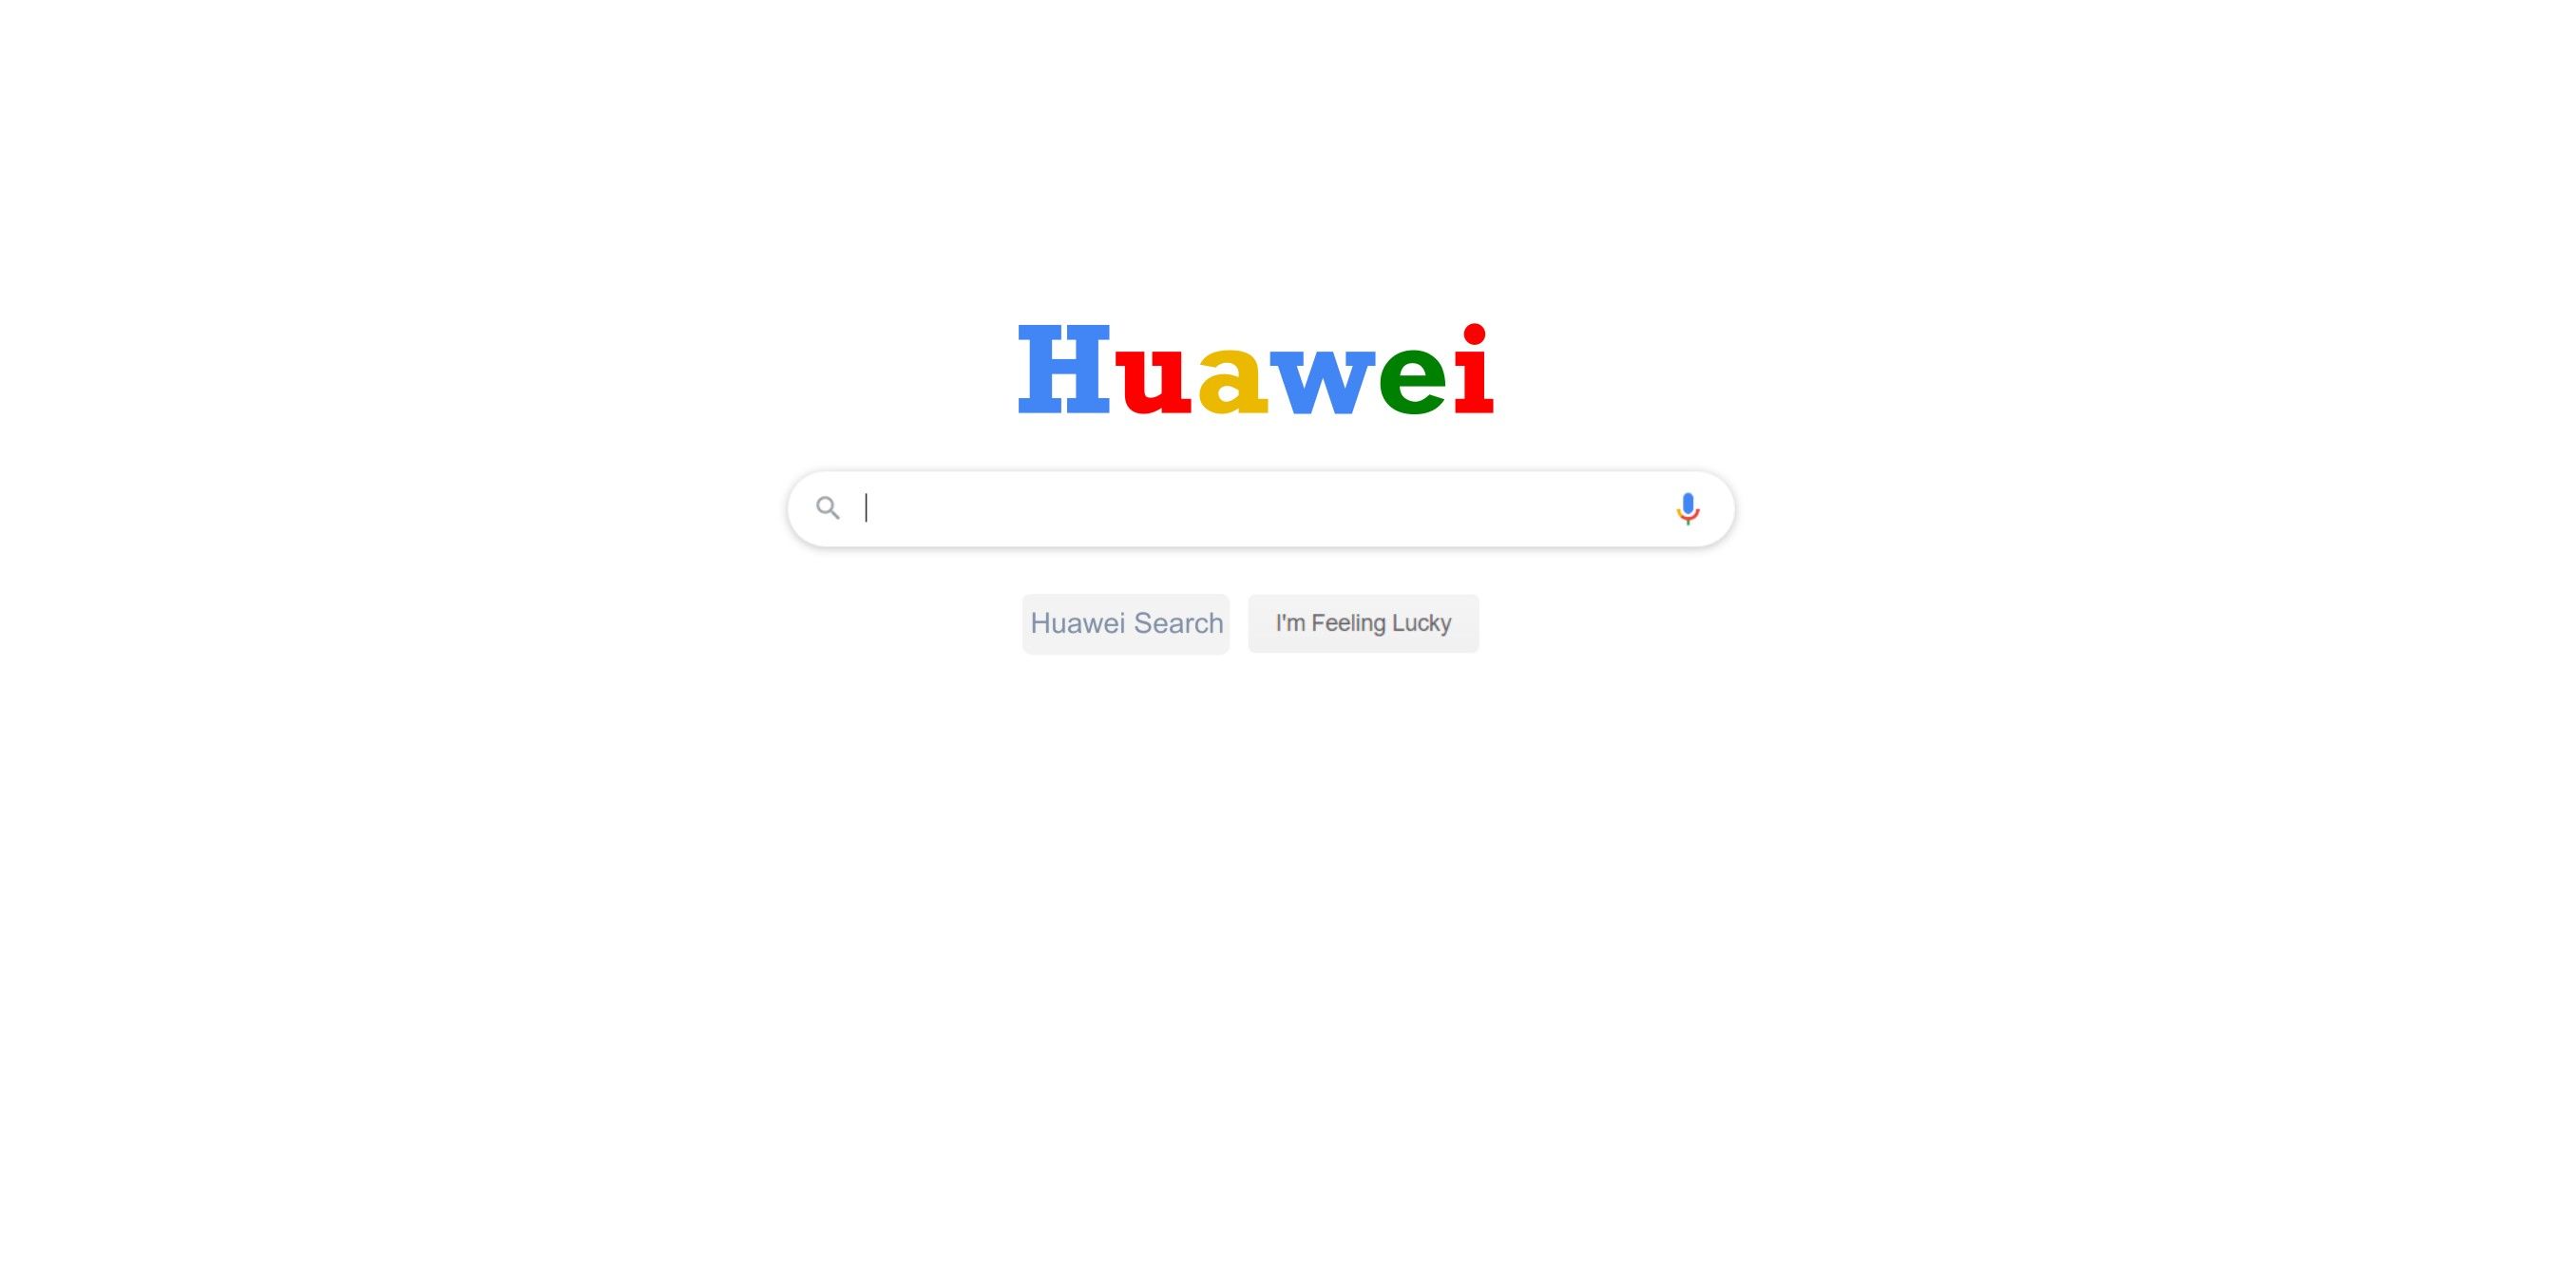 Huawei Search Is Coming & Thats Scary If the Accusations Are True